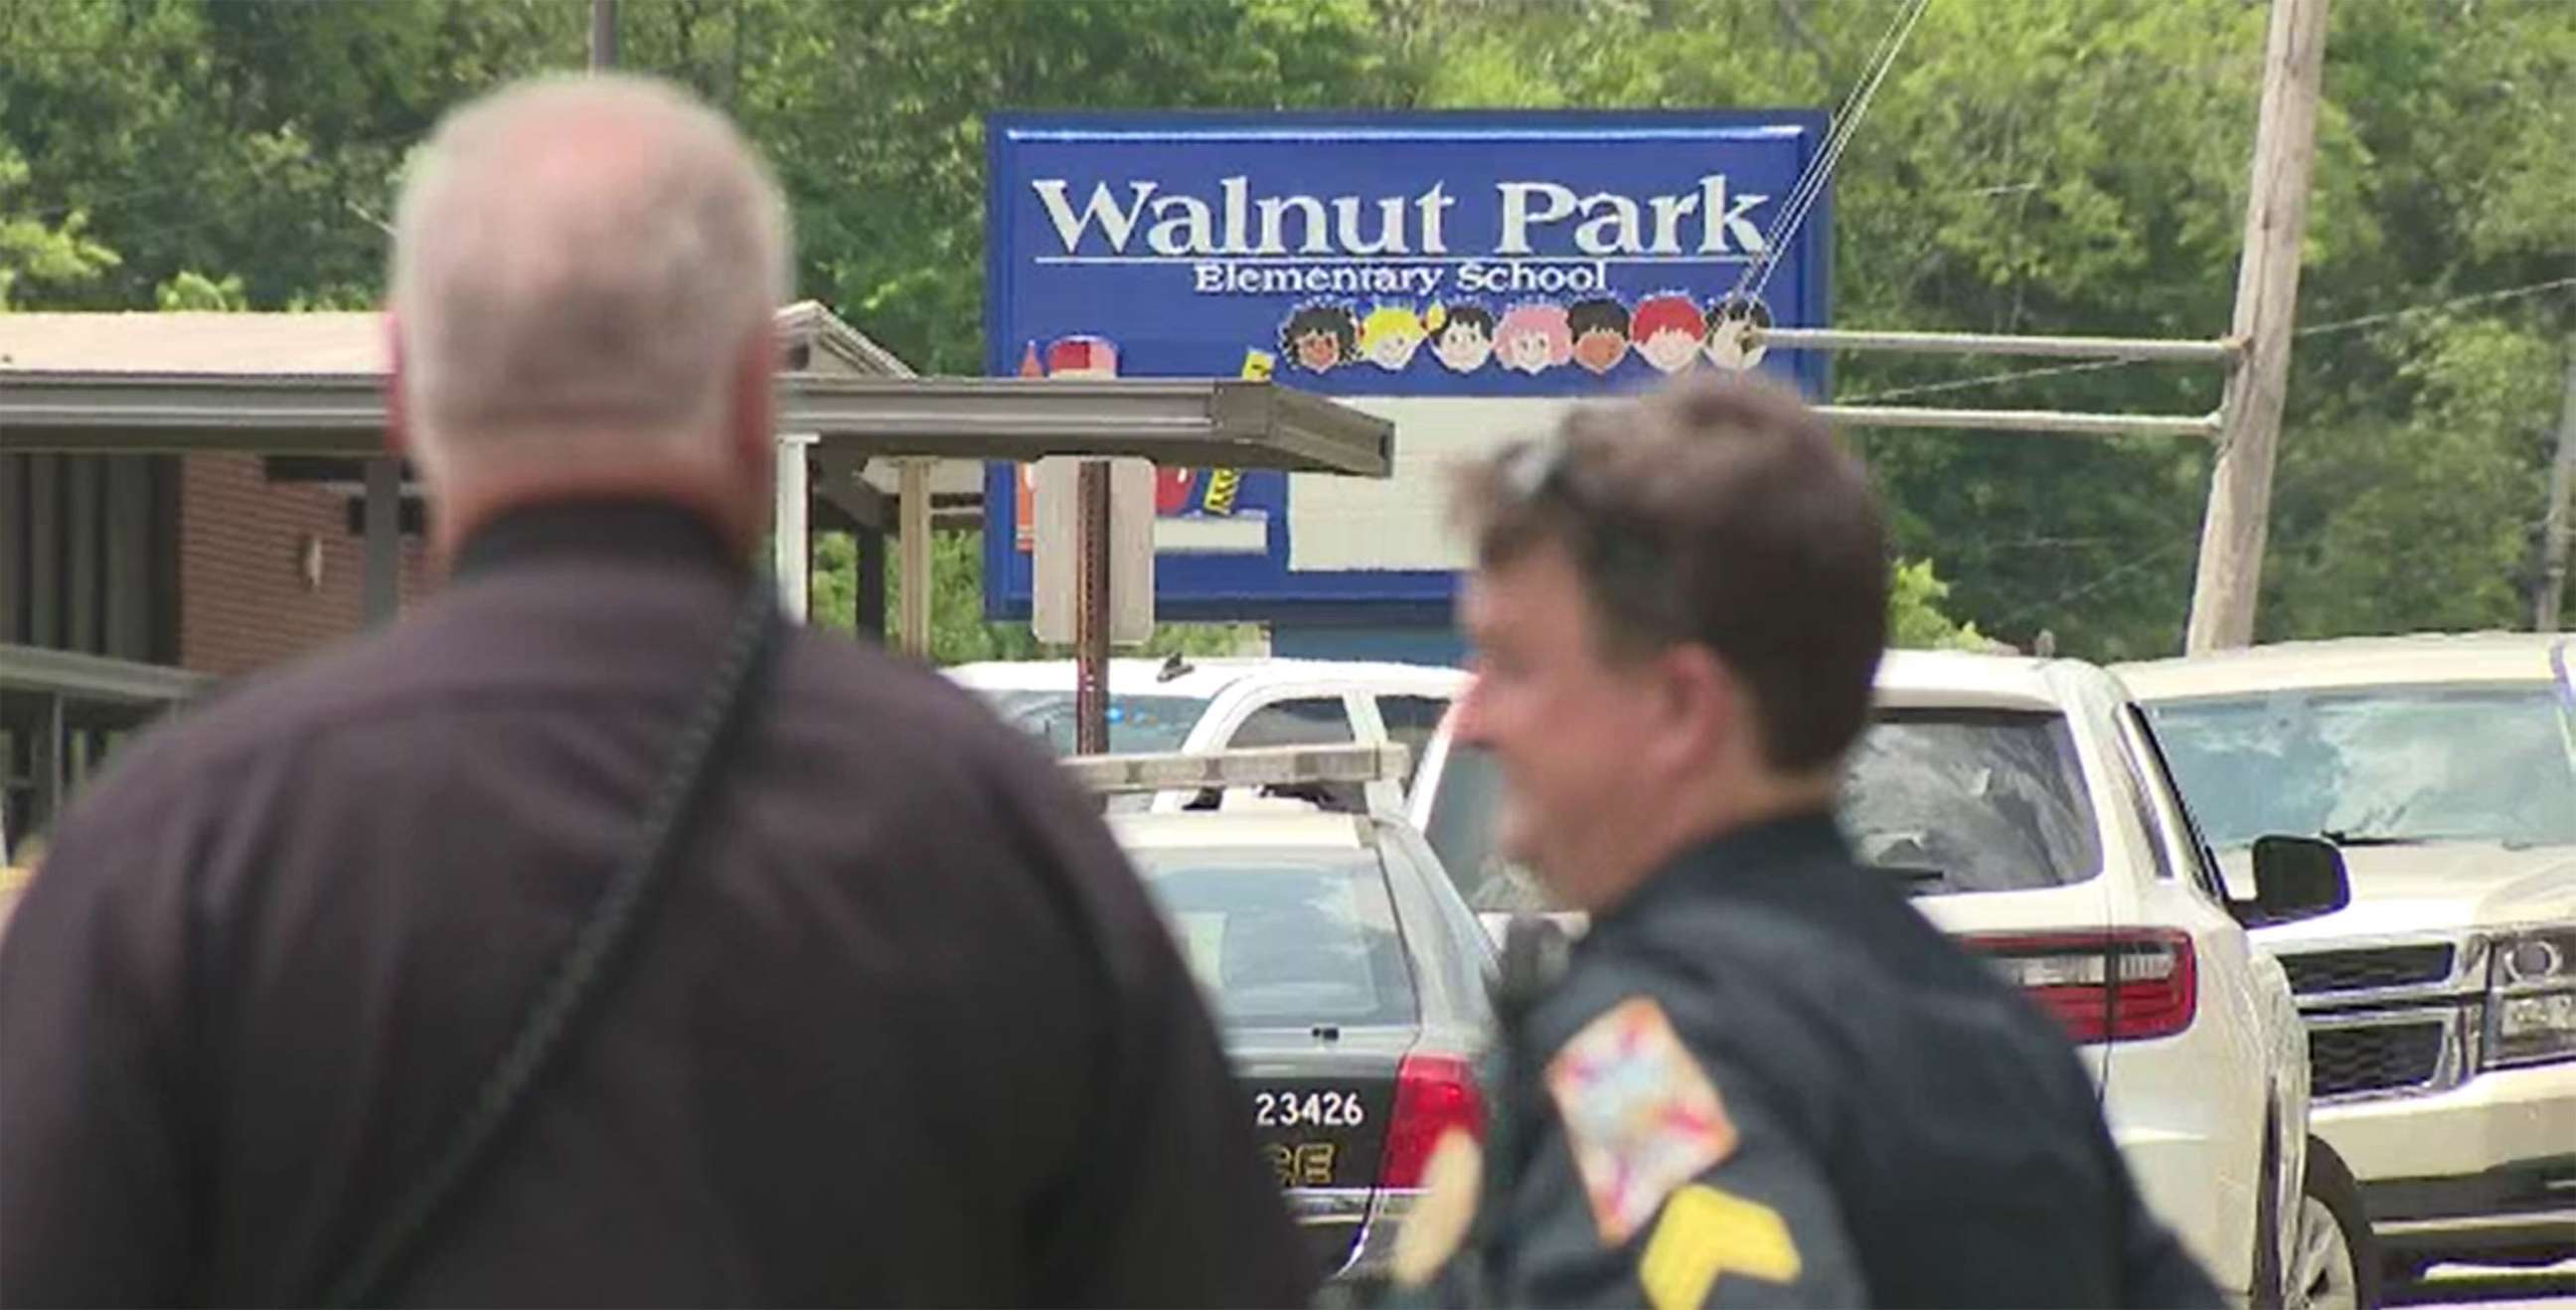 PHOTO: Authorities respond to the scene of the fatal shooting of a man by an officer outside Walnut Park Elementary School in Gadsden, Ala., June 9, 2022.